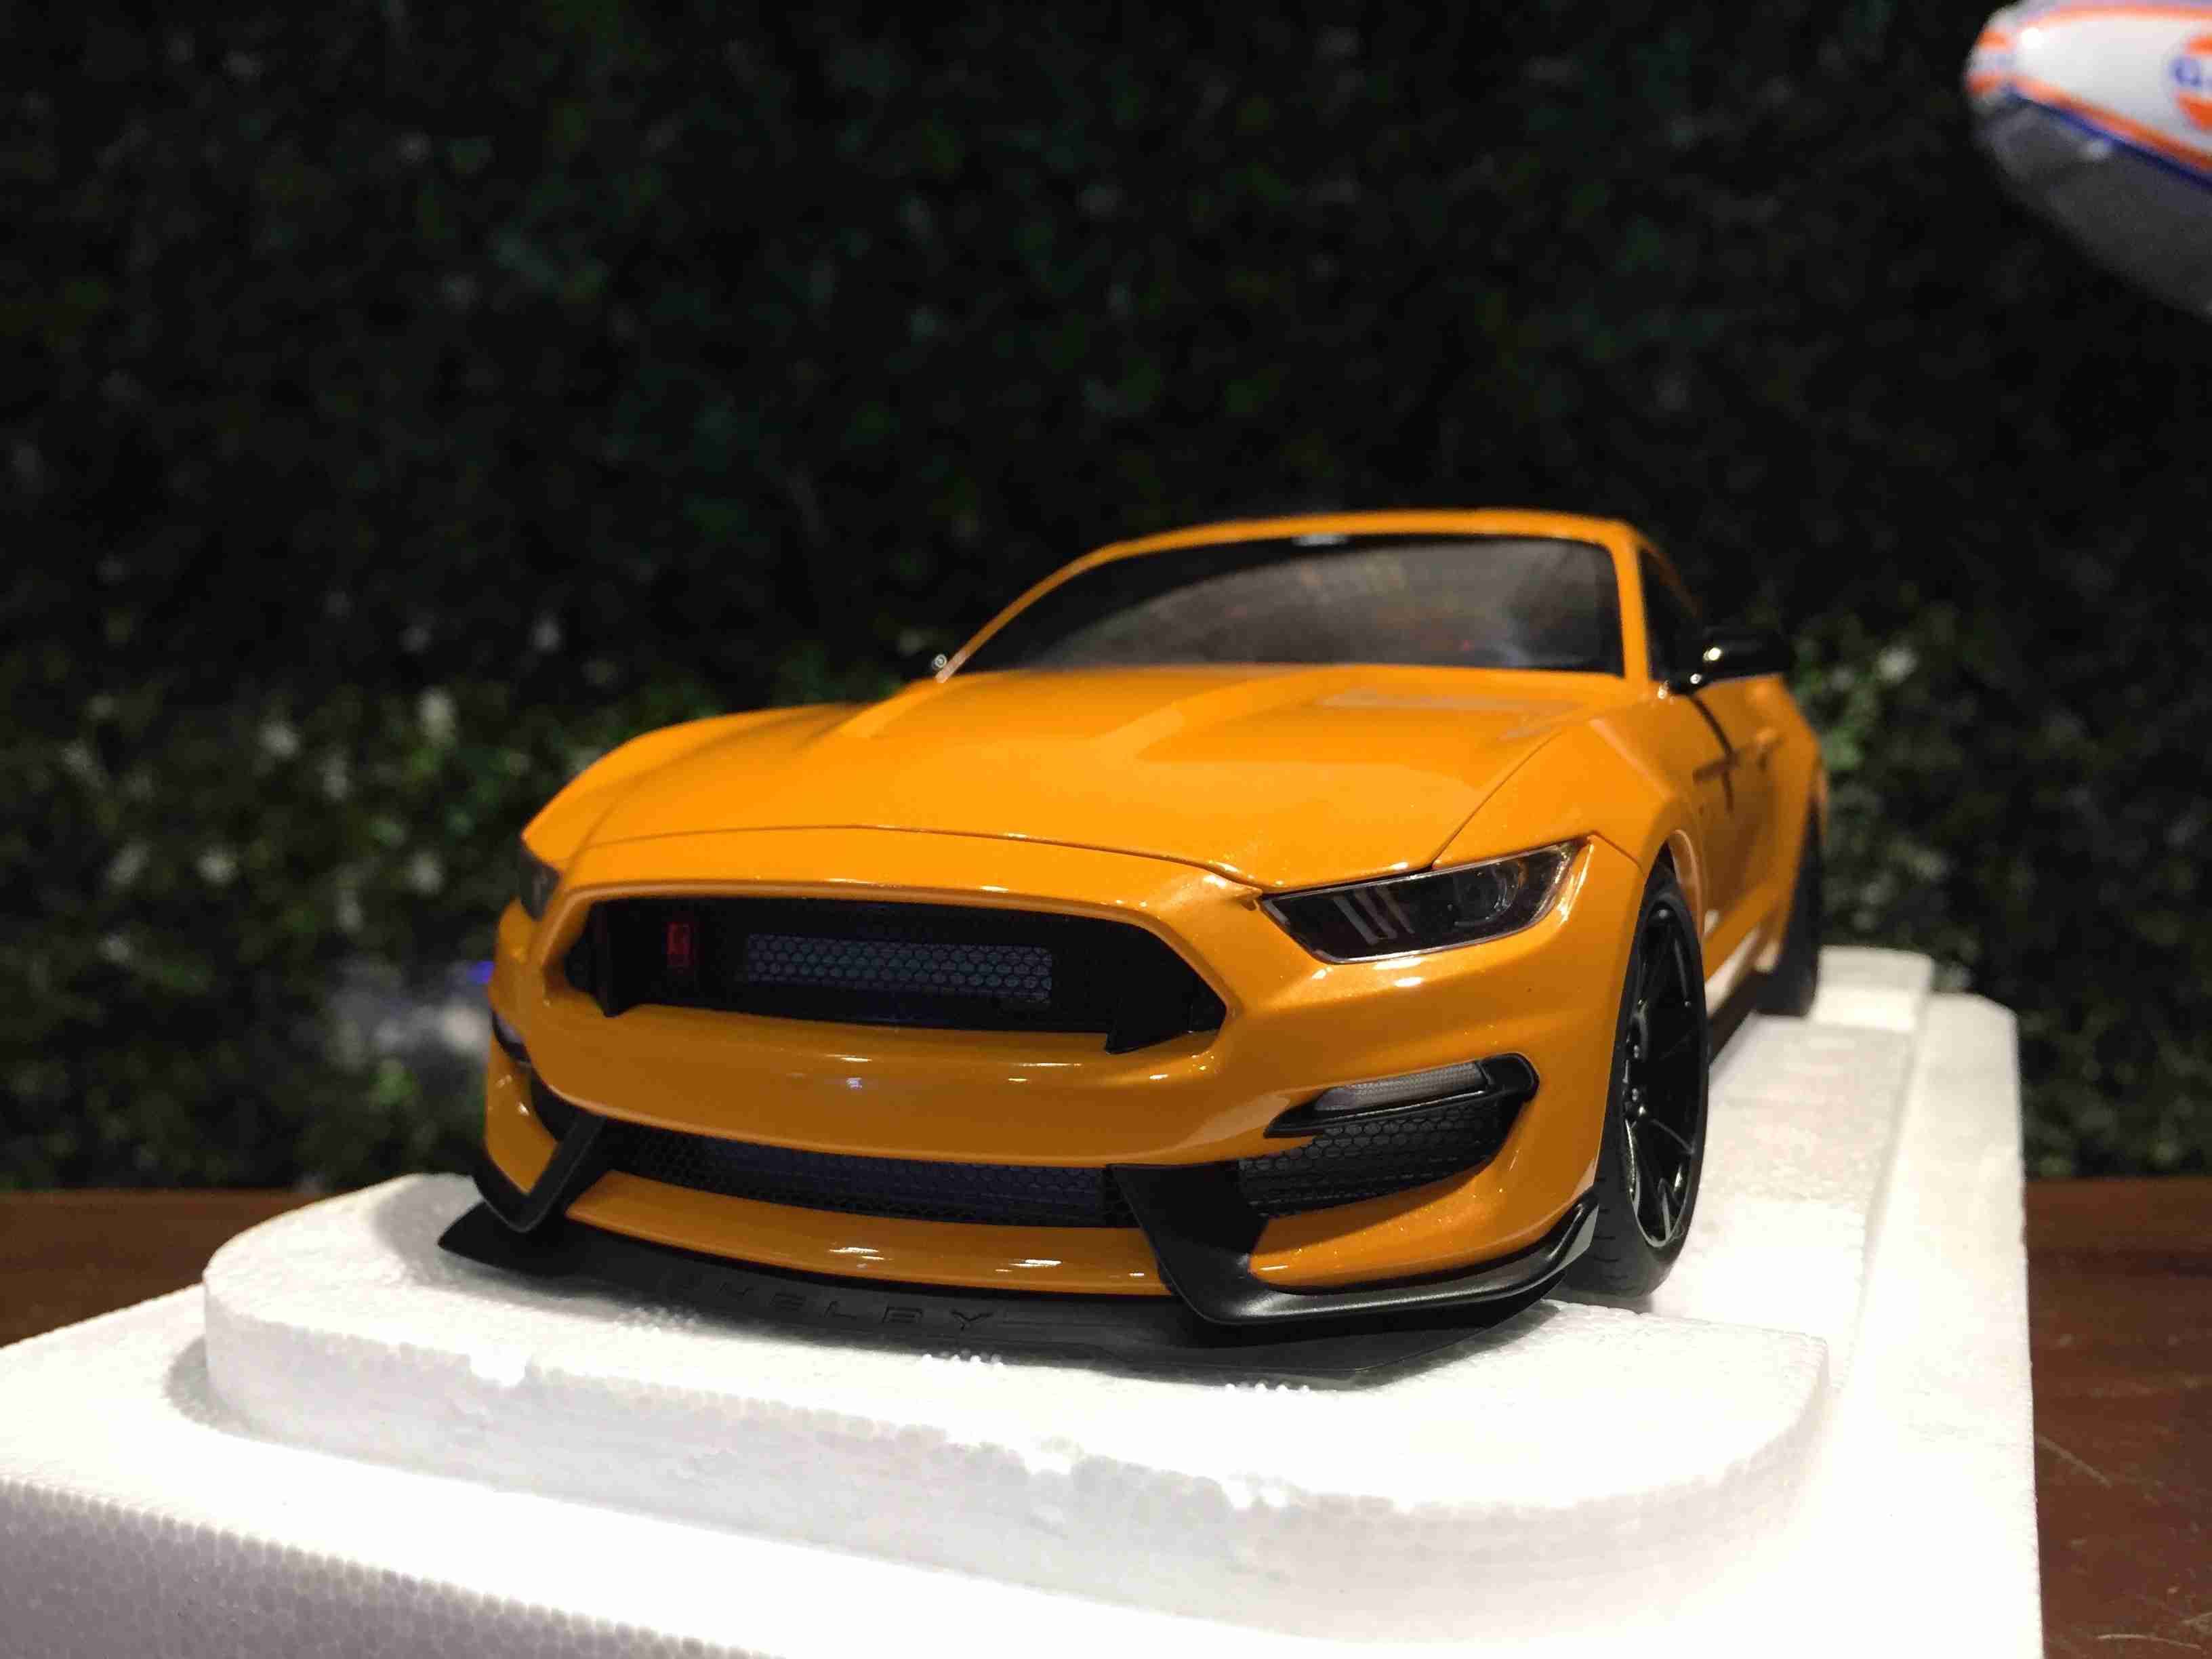 1/18 AUTOart Ford Mustang Shelby GT350R Orange 72929【MGM】